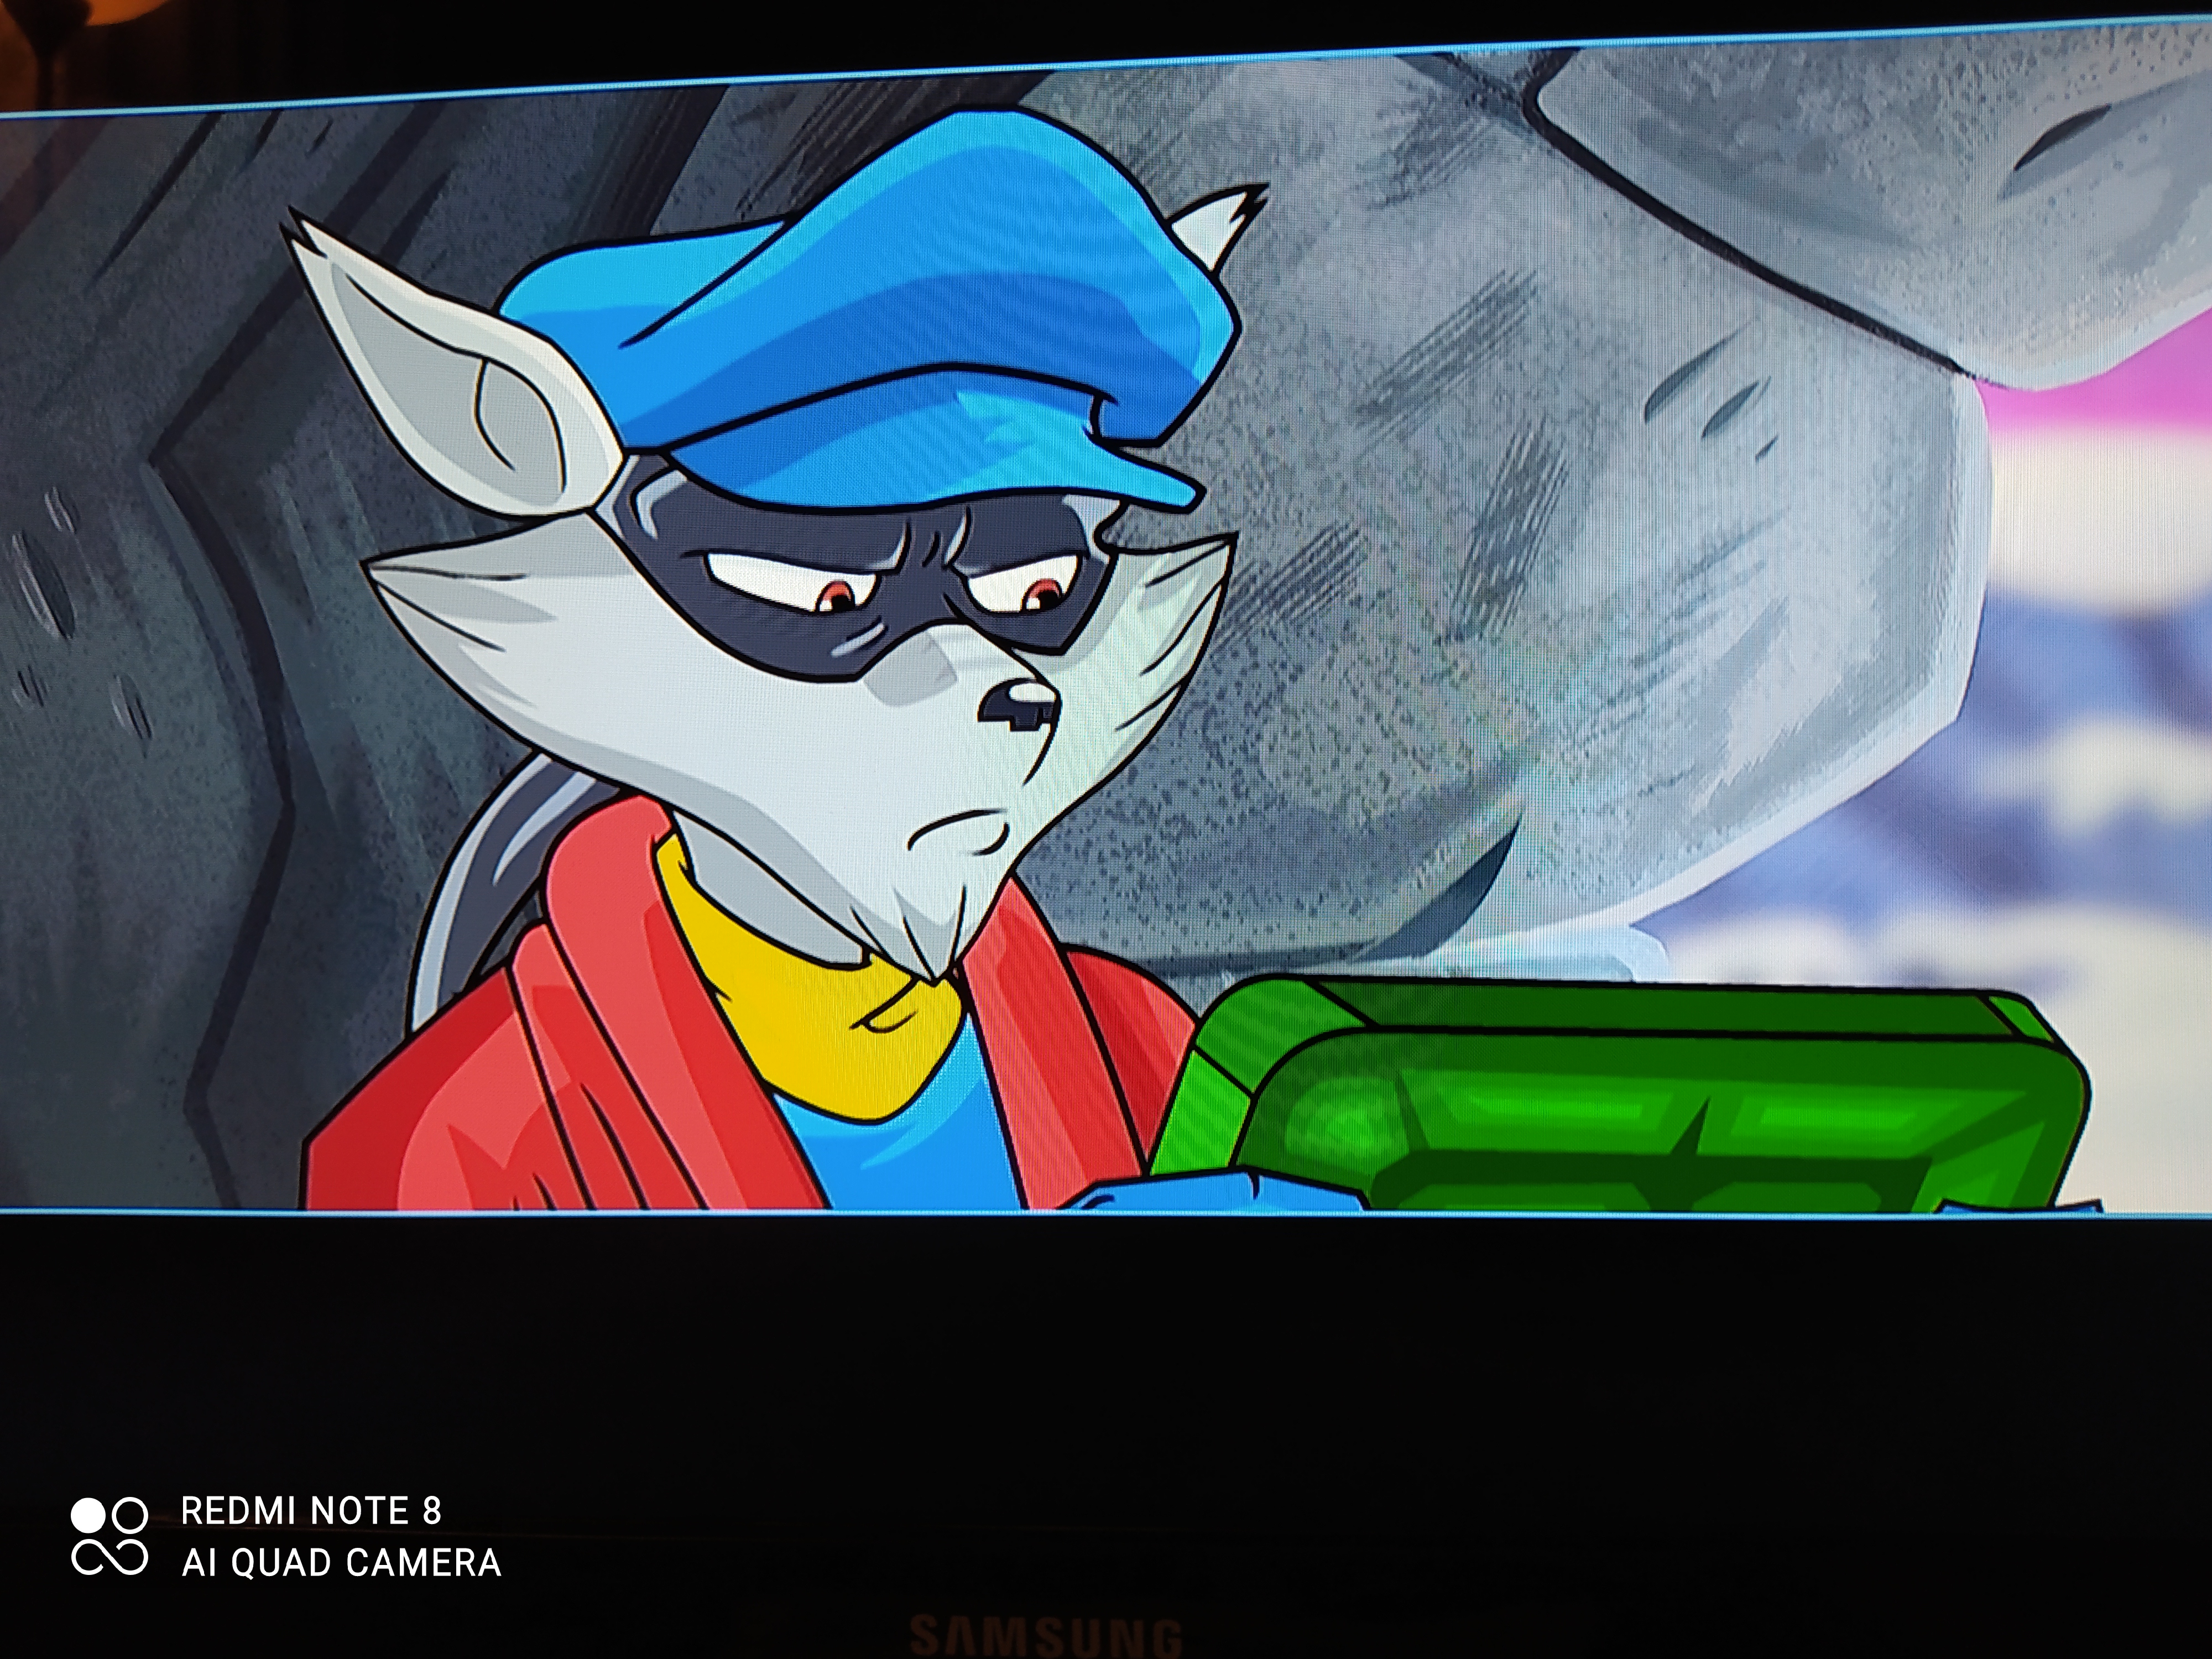 Sly Cooper Thieves in Time : Sly Cooper by Stevenafc11 on DeviantArt